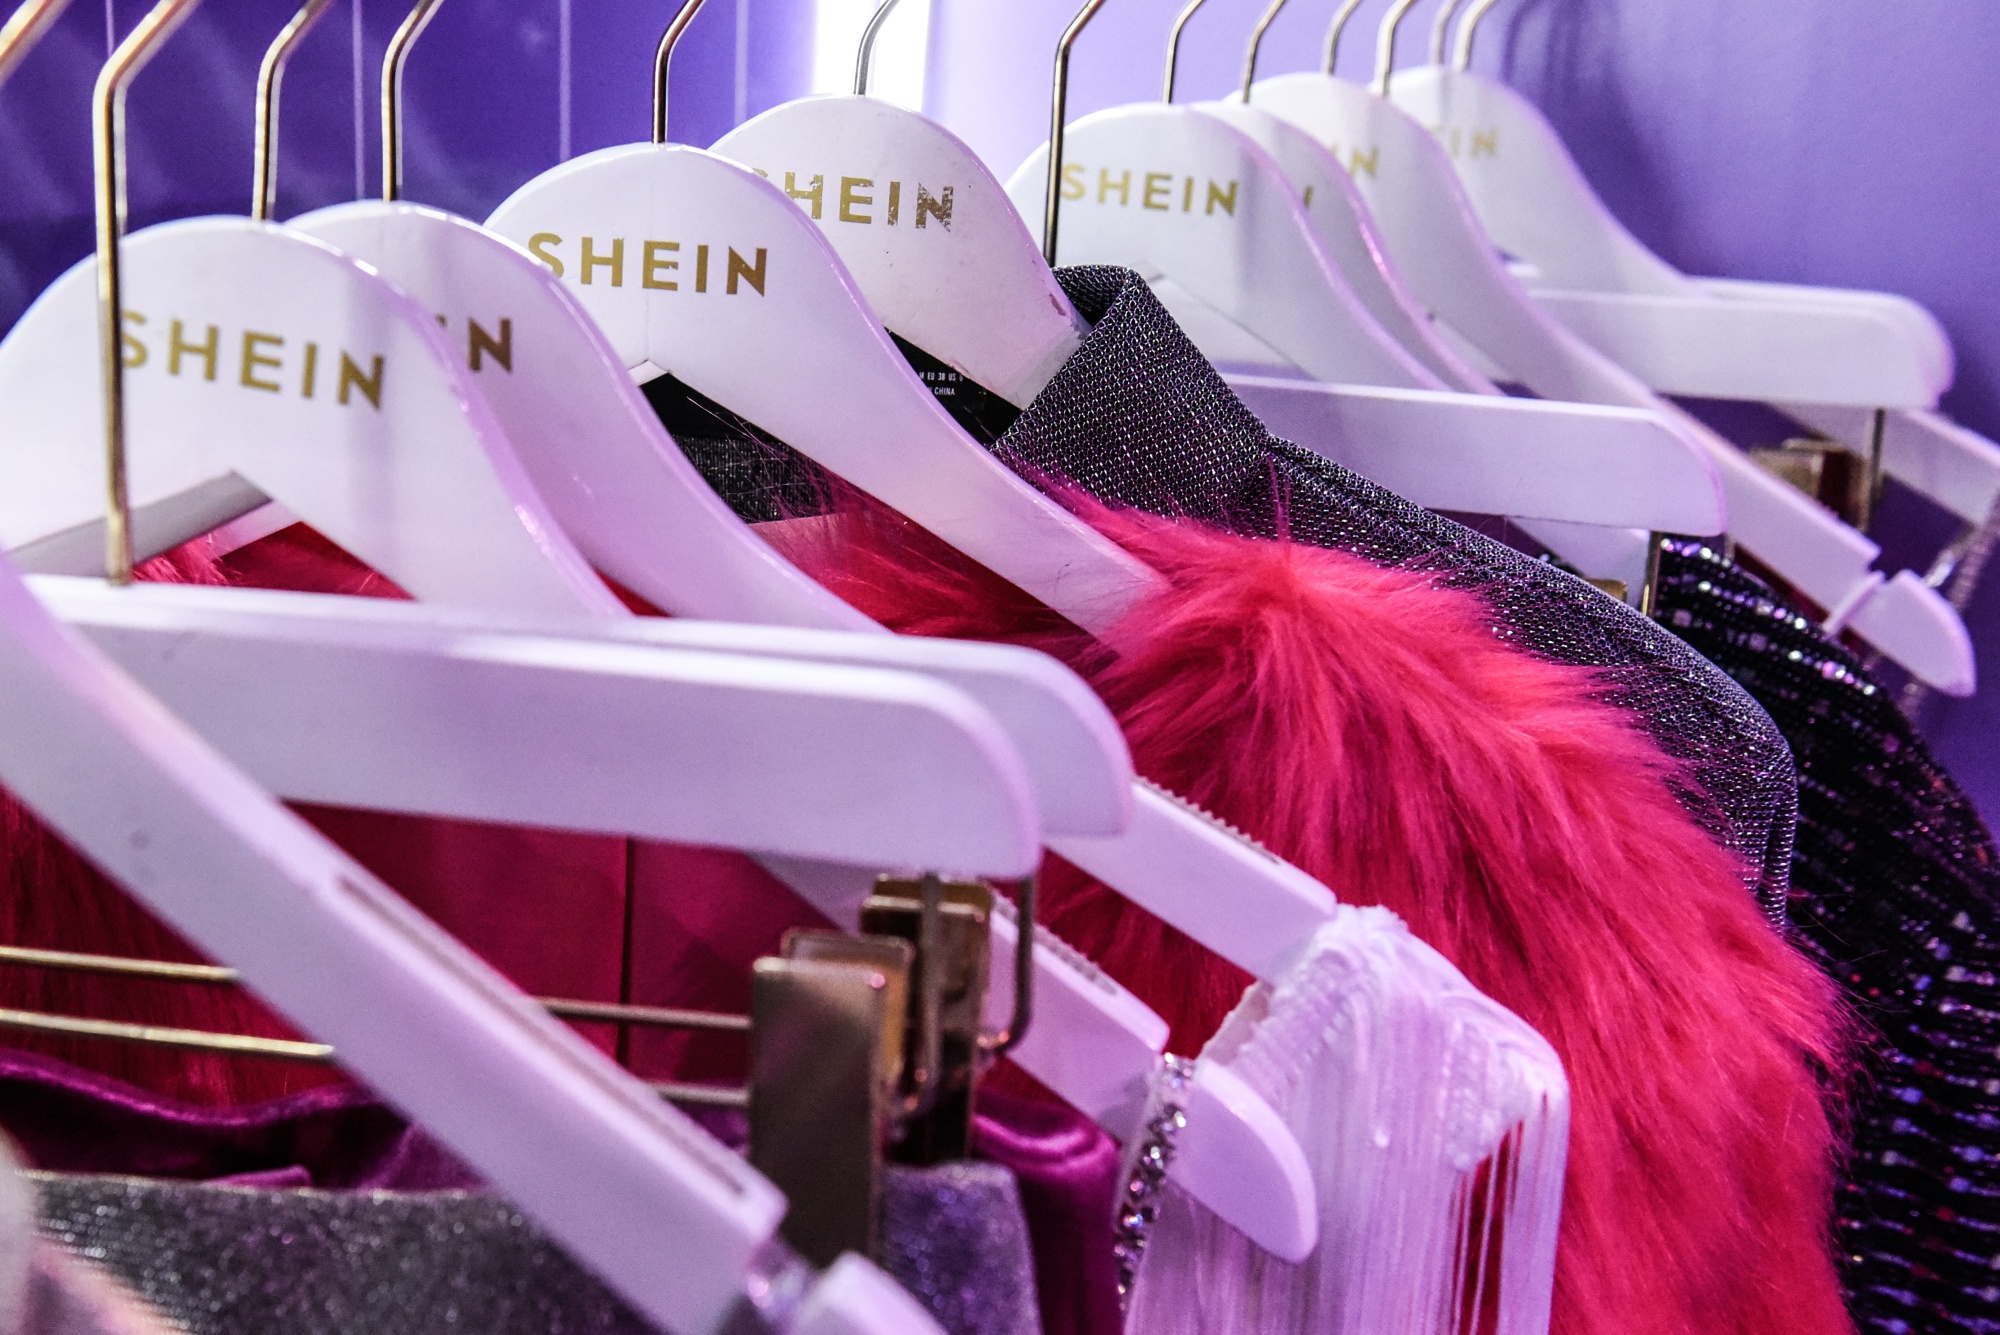 Shein's U.S. expansion starts with distribution center in Indiana –  Indianapolis Business Journal